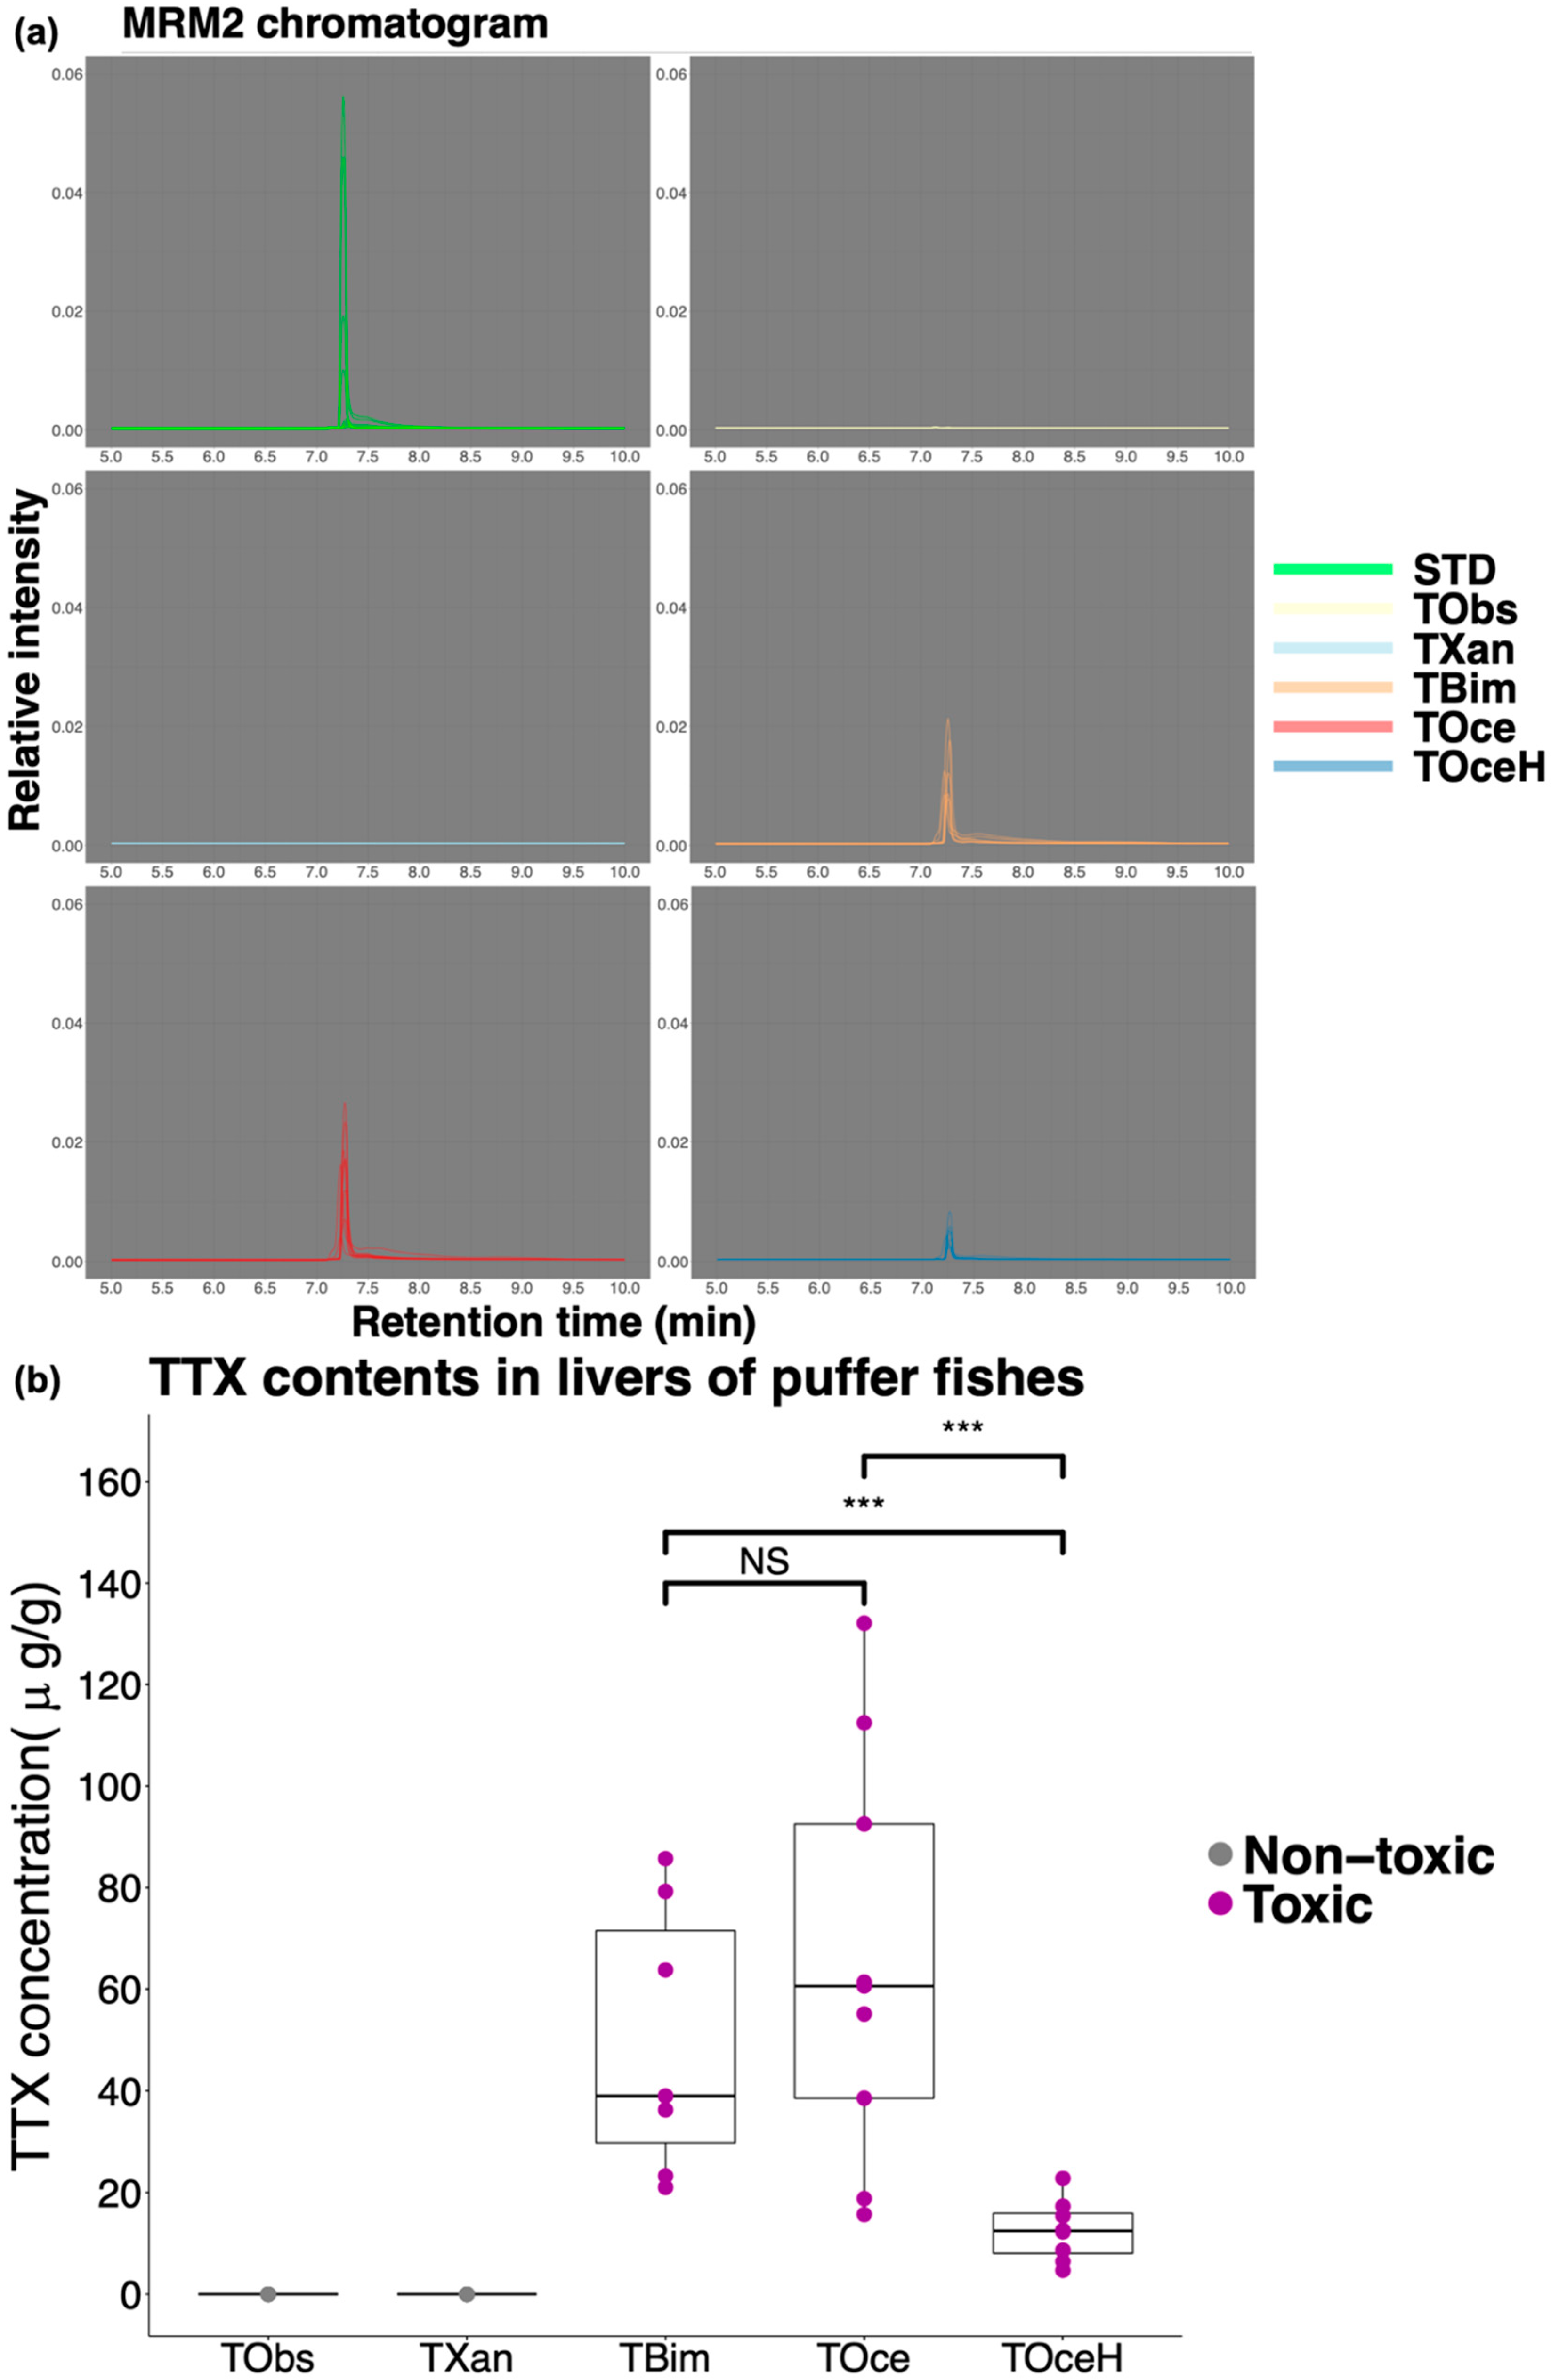 Marine Drugs | Free Full-Text | Puffer Fish Gut Microbiota Studies Revealed  Unique Bacterial Co-Occurrence Patterns and New Insights on Tetrodotoxin  Producers